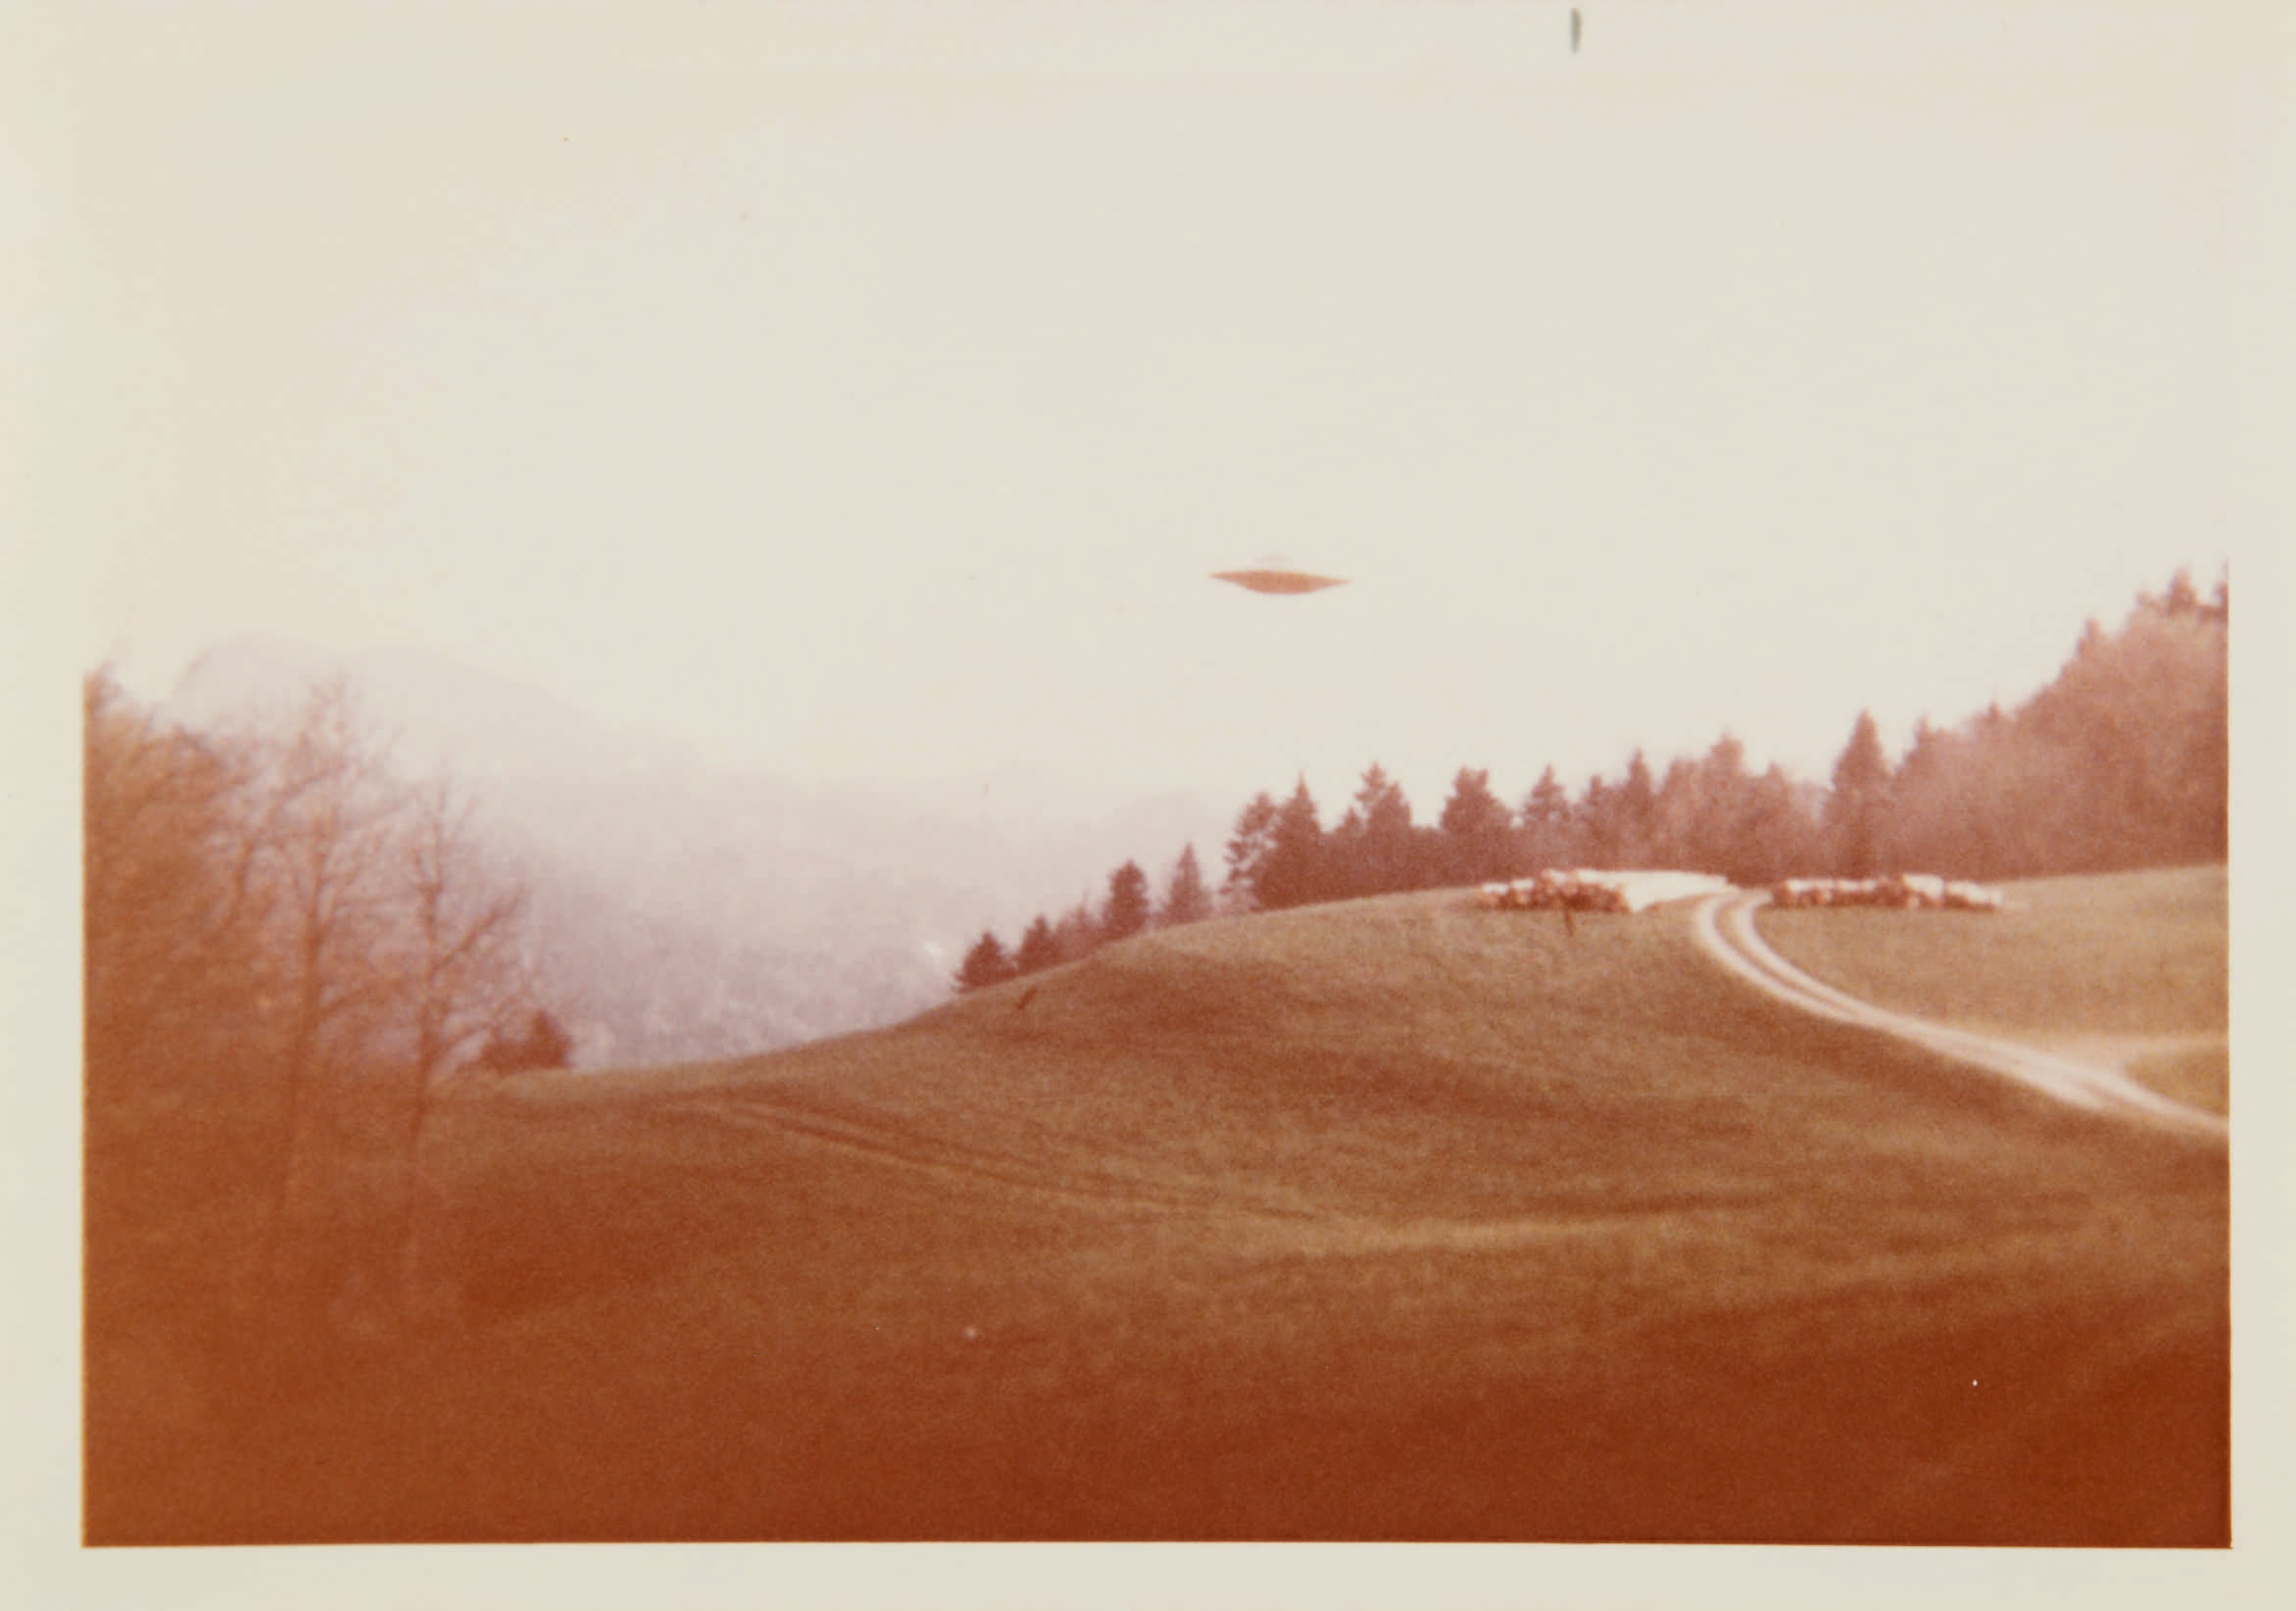 UFO photos made famous by 'The XFiles' surface, up for auction